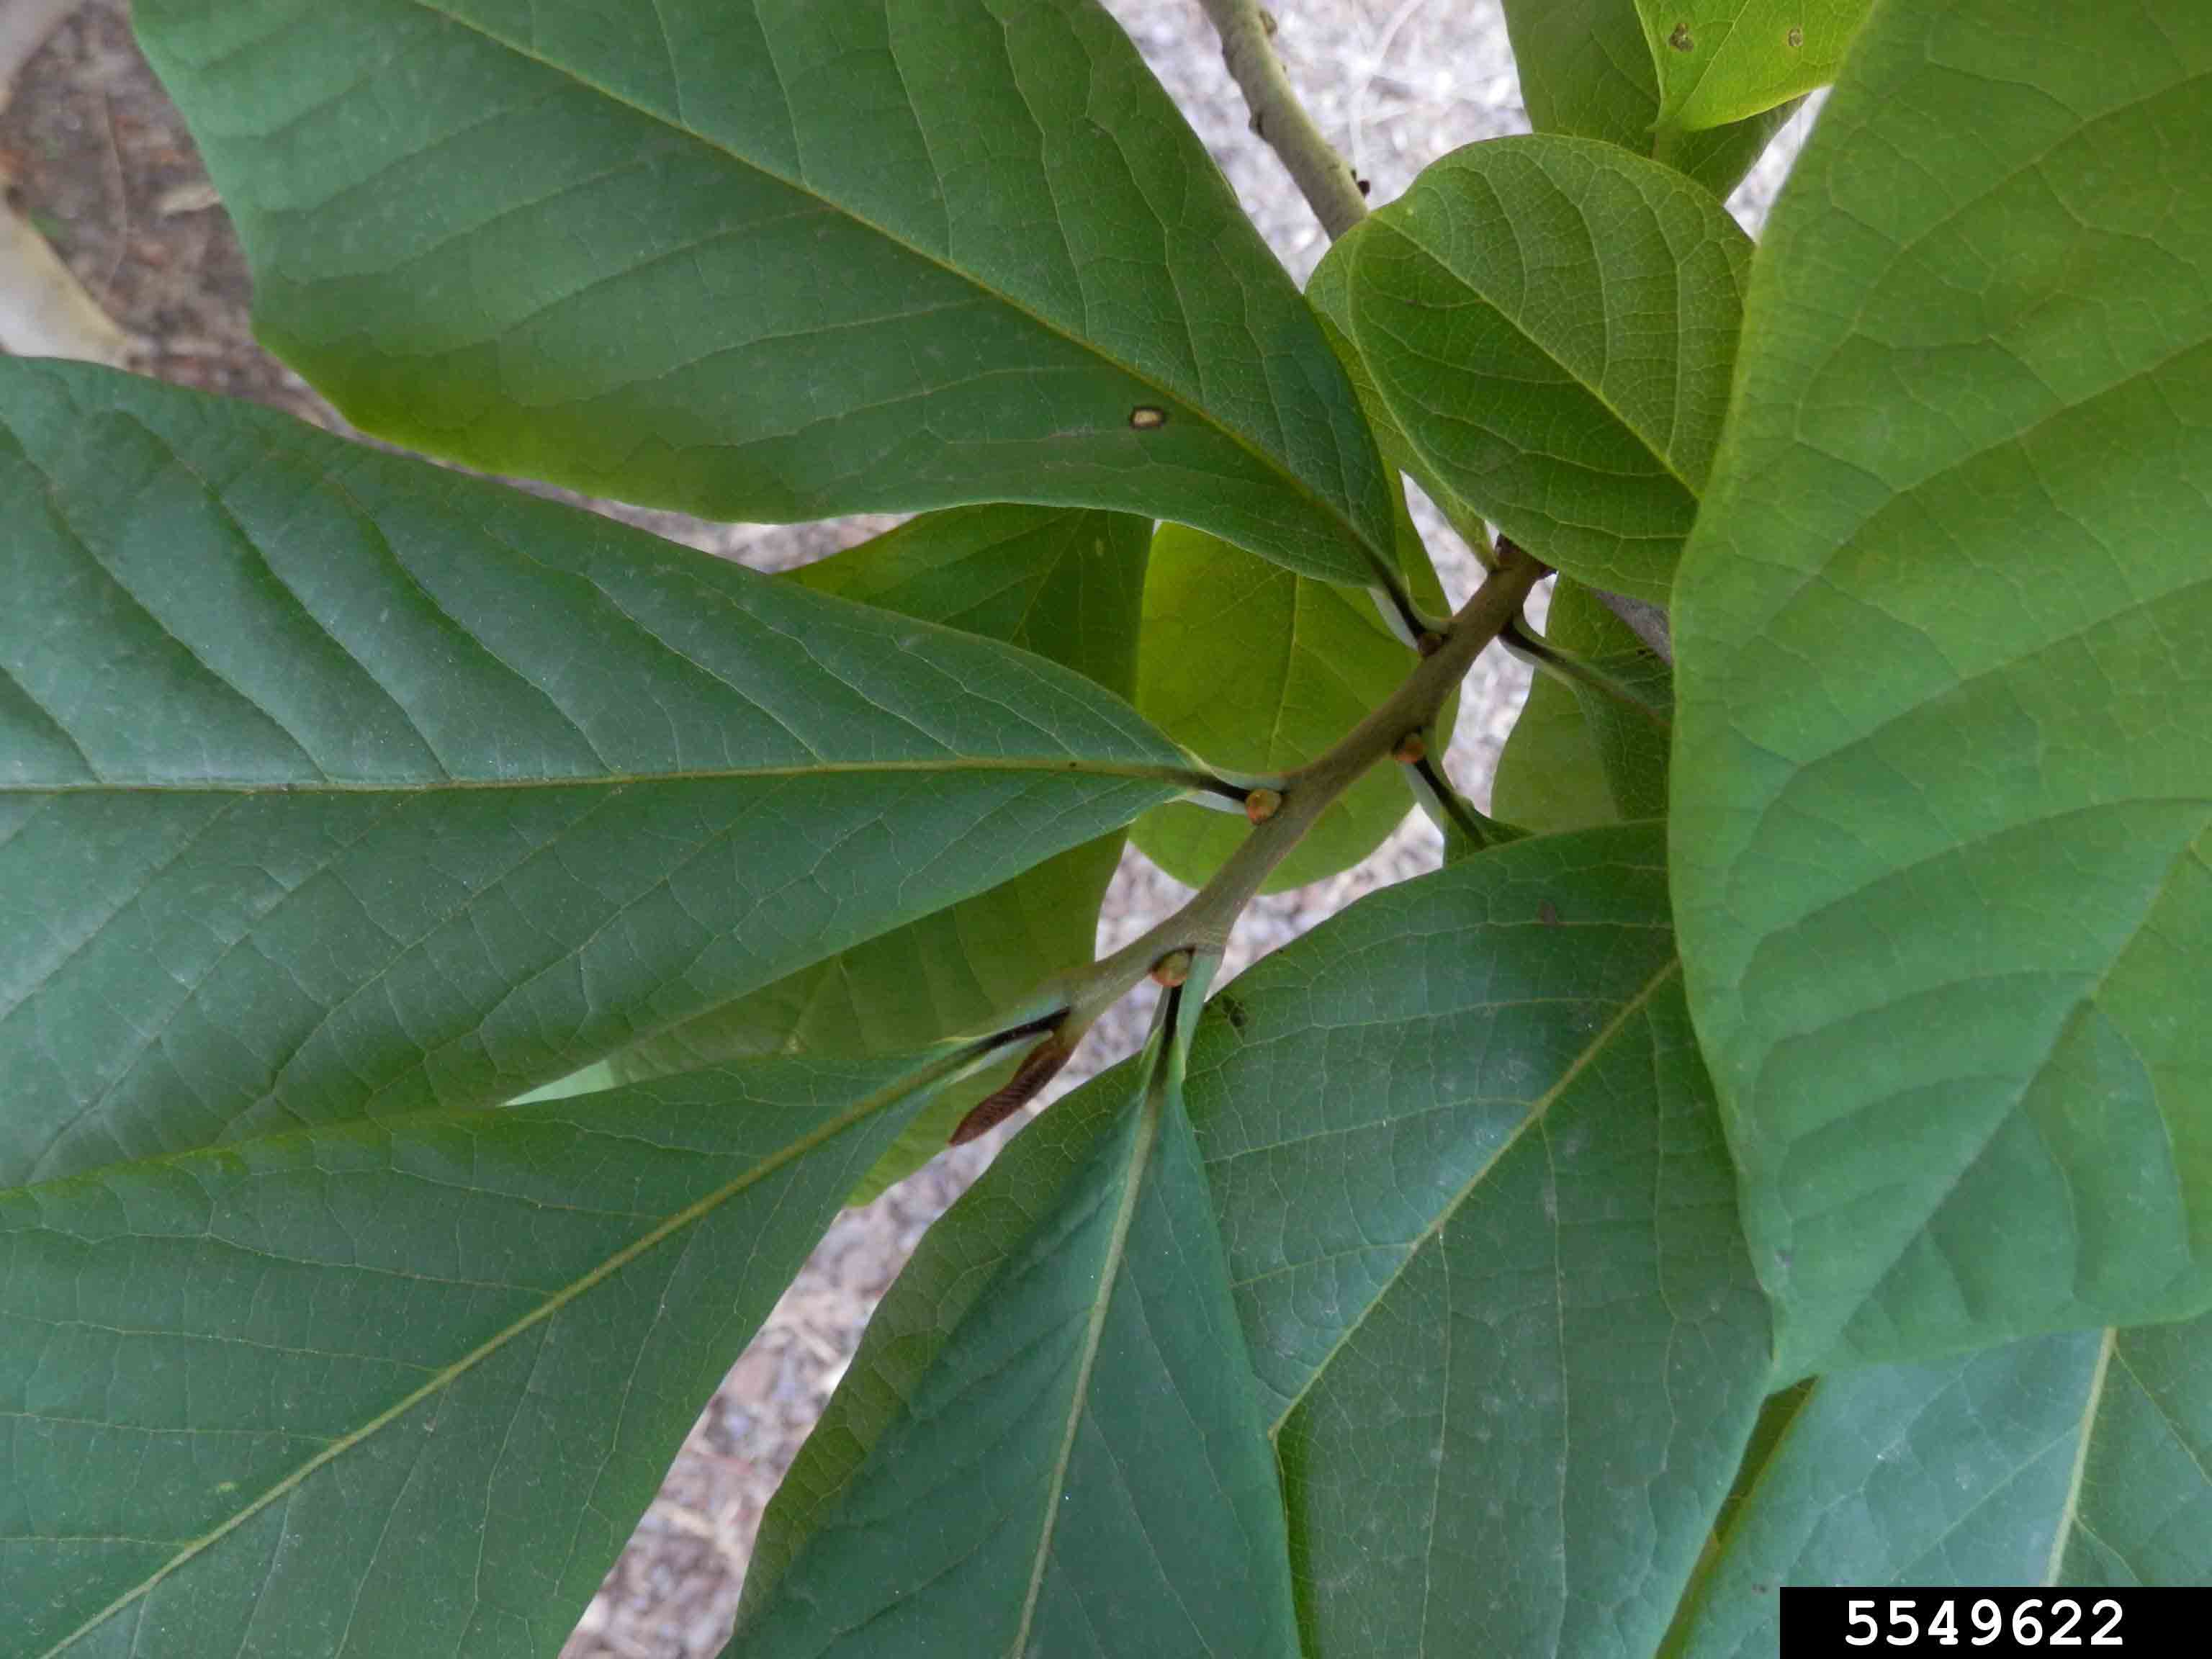 Pawpaw leaves, showing alternate arrangement and flower buds in leaf axils